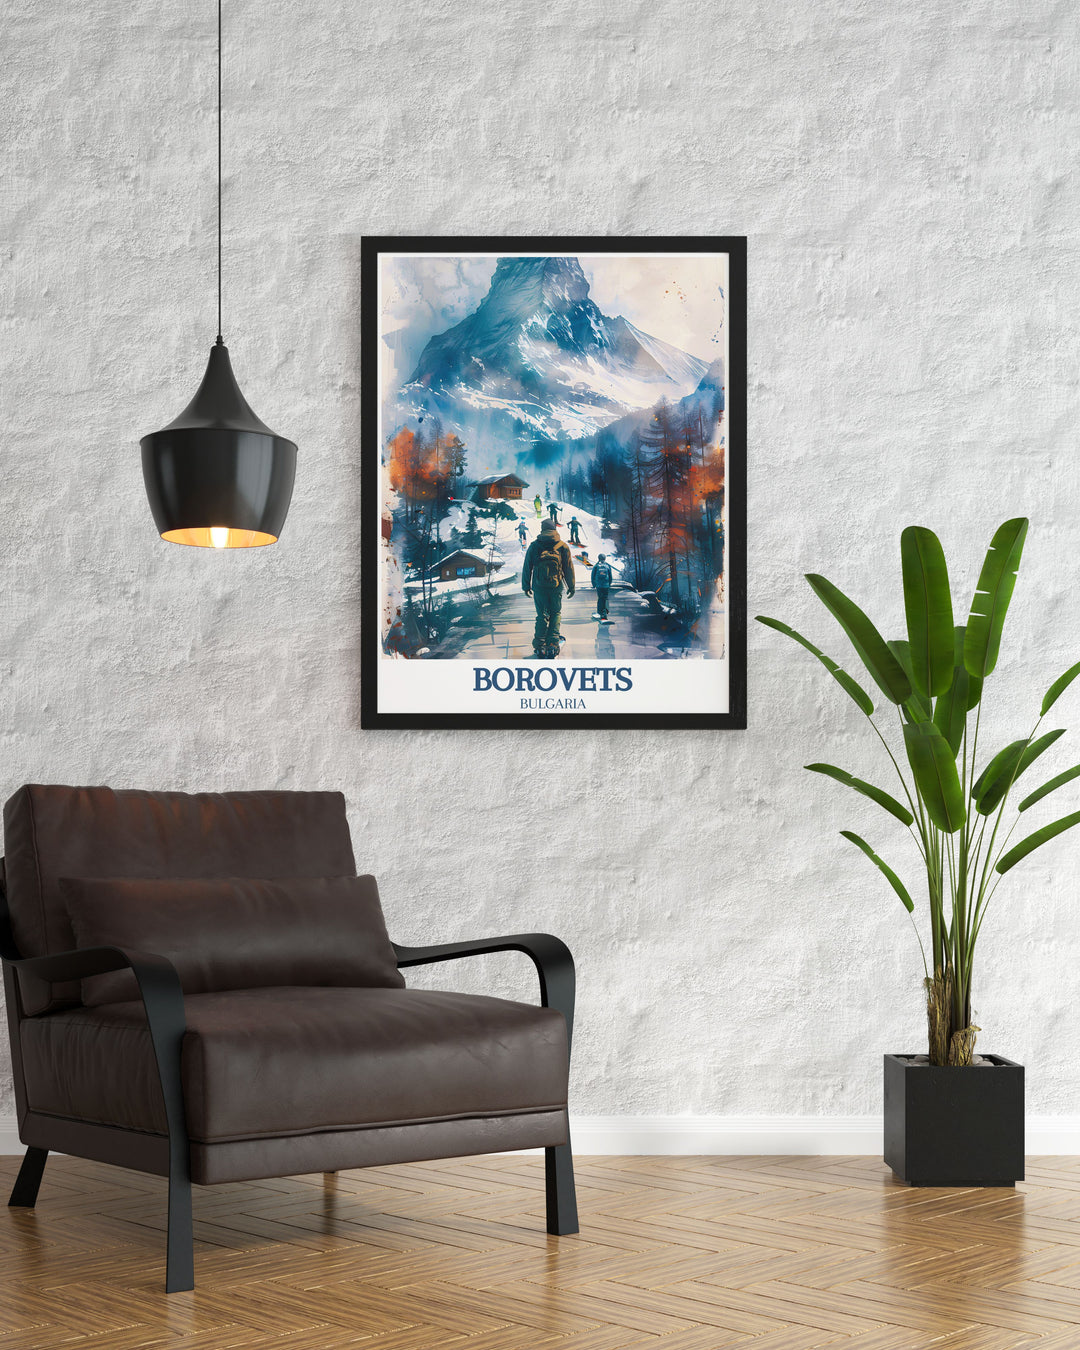 Beautiful Borovets travel poster capturing the dynamic atmosphere of the alpine resort and the serene beauty of the Musala Pathway, perfect for enhancing your home or office with Bulgarias iconic landmarks.